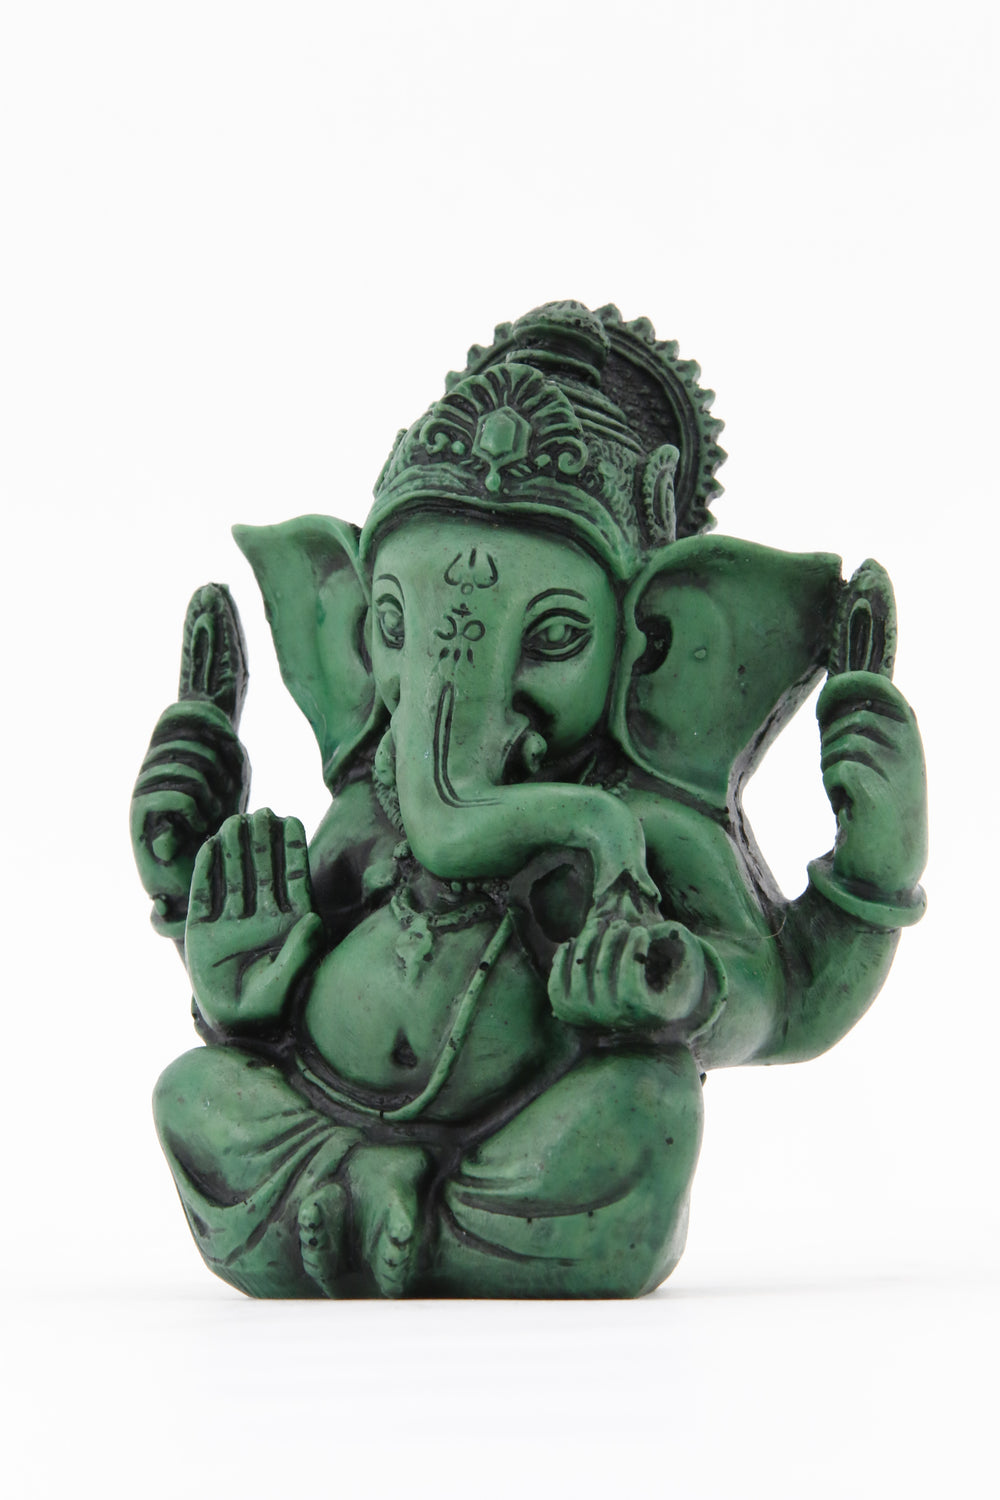 GANESHA AURA COLORED STATUE LARGE SIZE SIDE VIEW